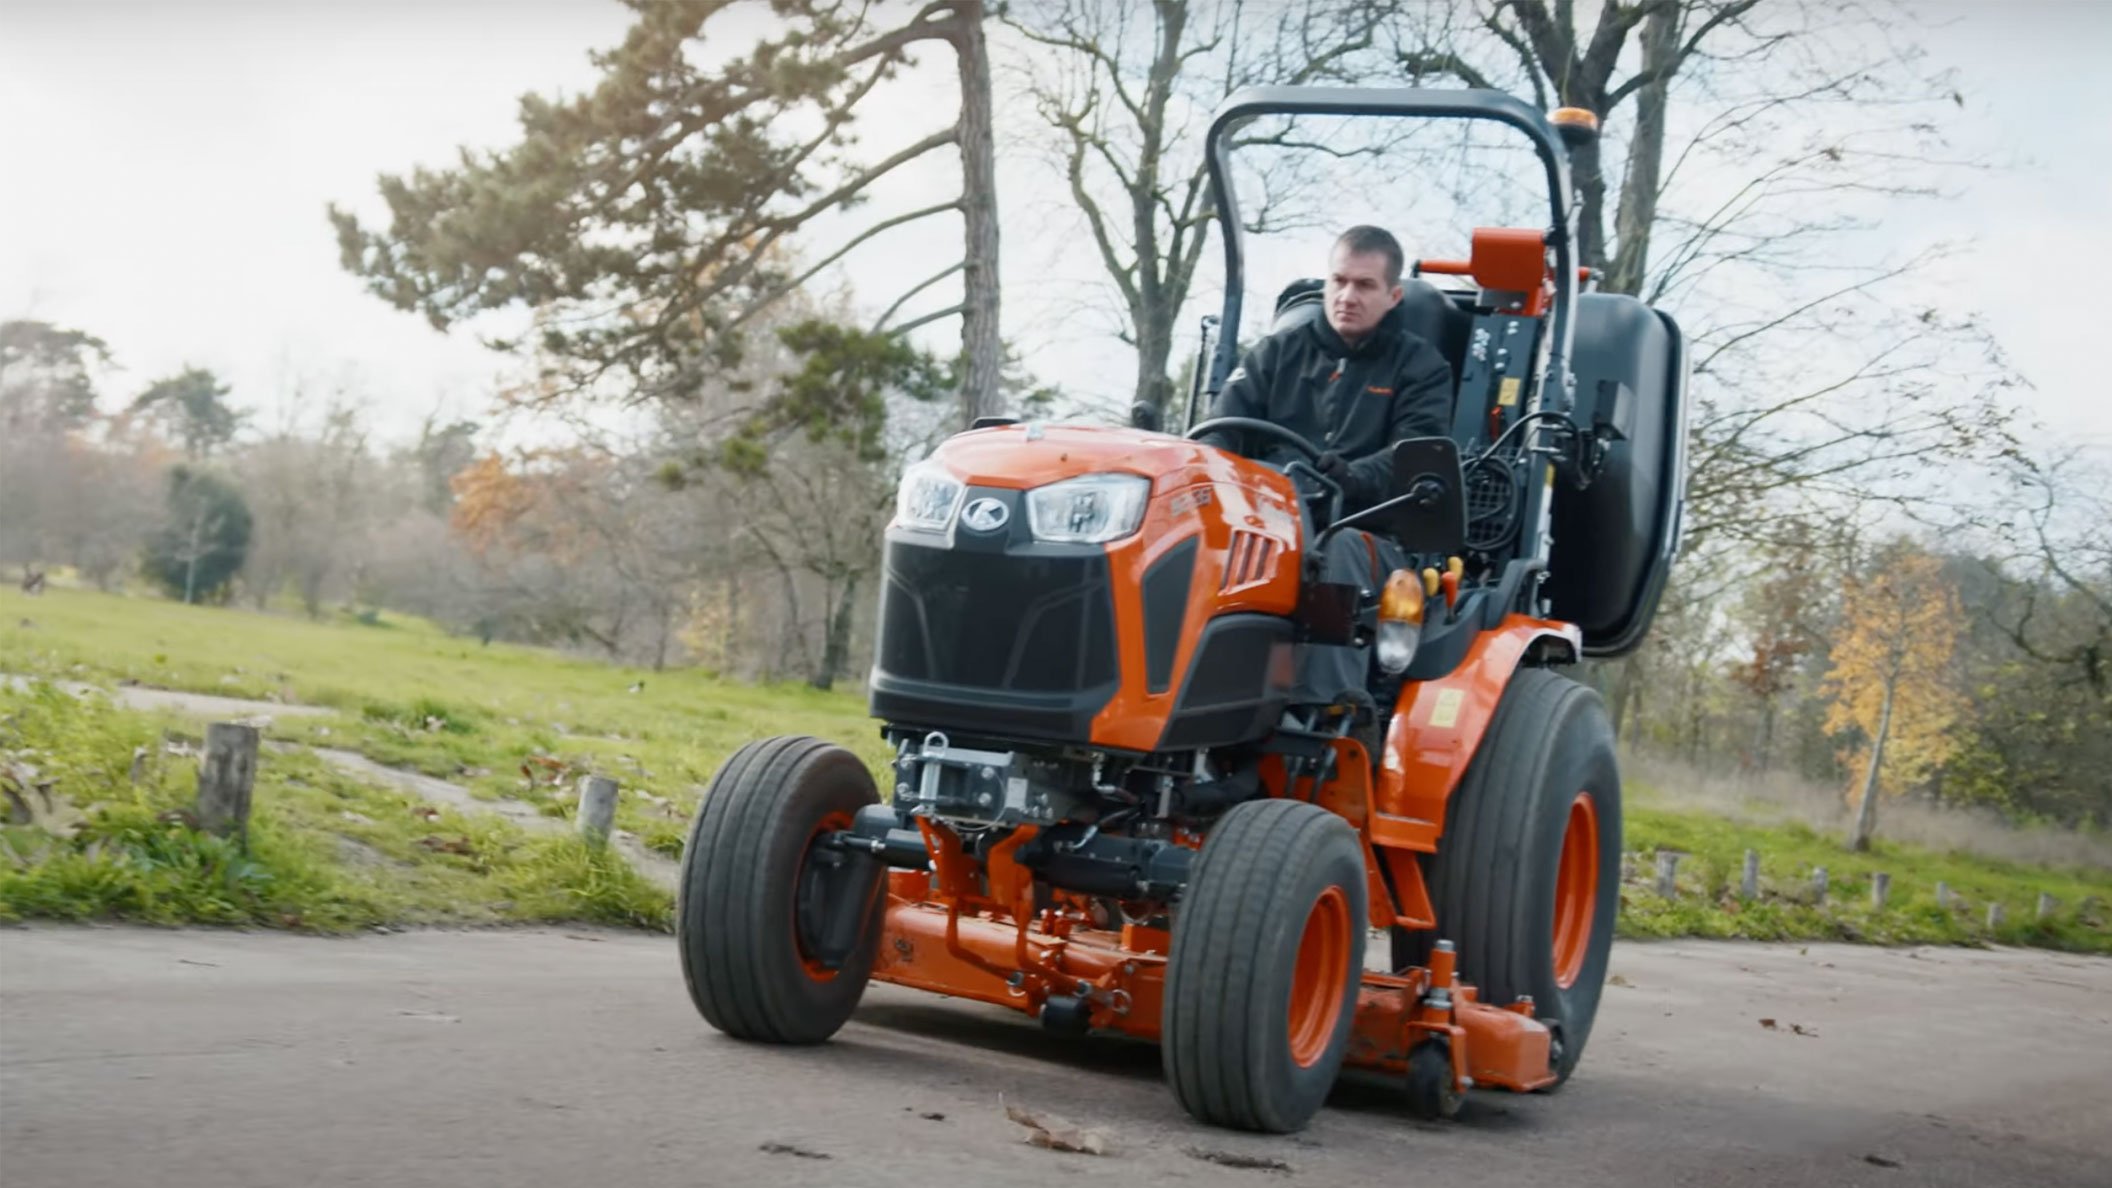 E-Powered Compact Tractor. The Mission: Zero Emissions